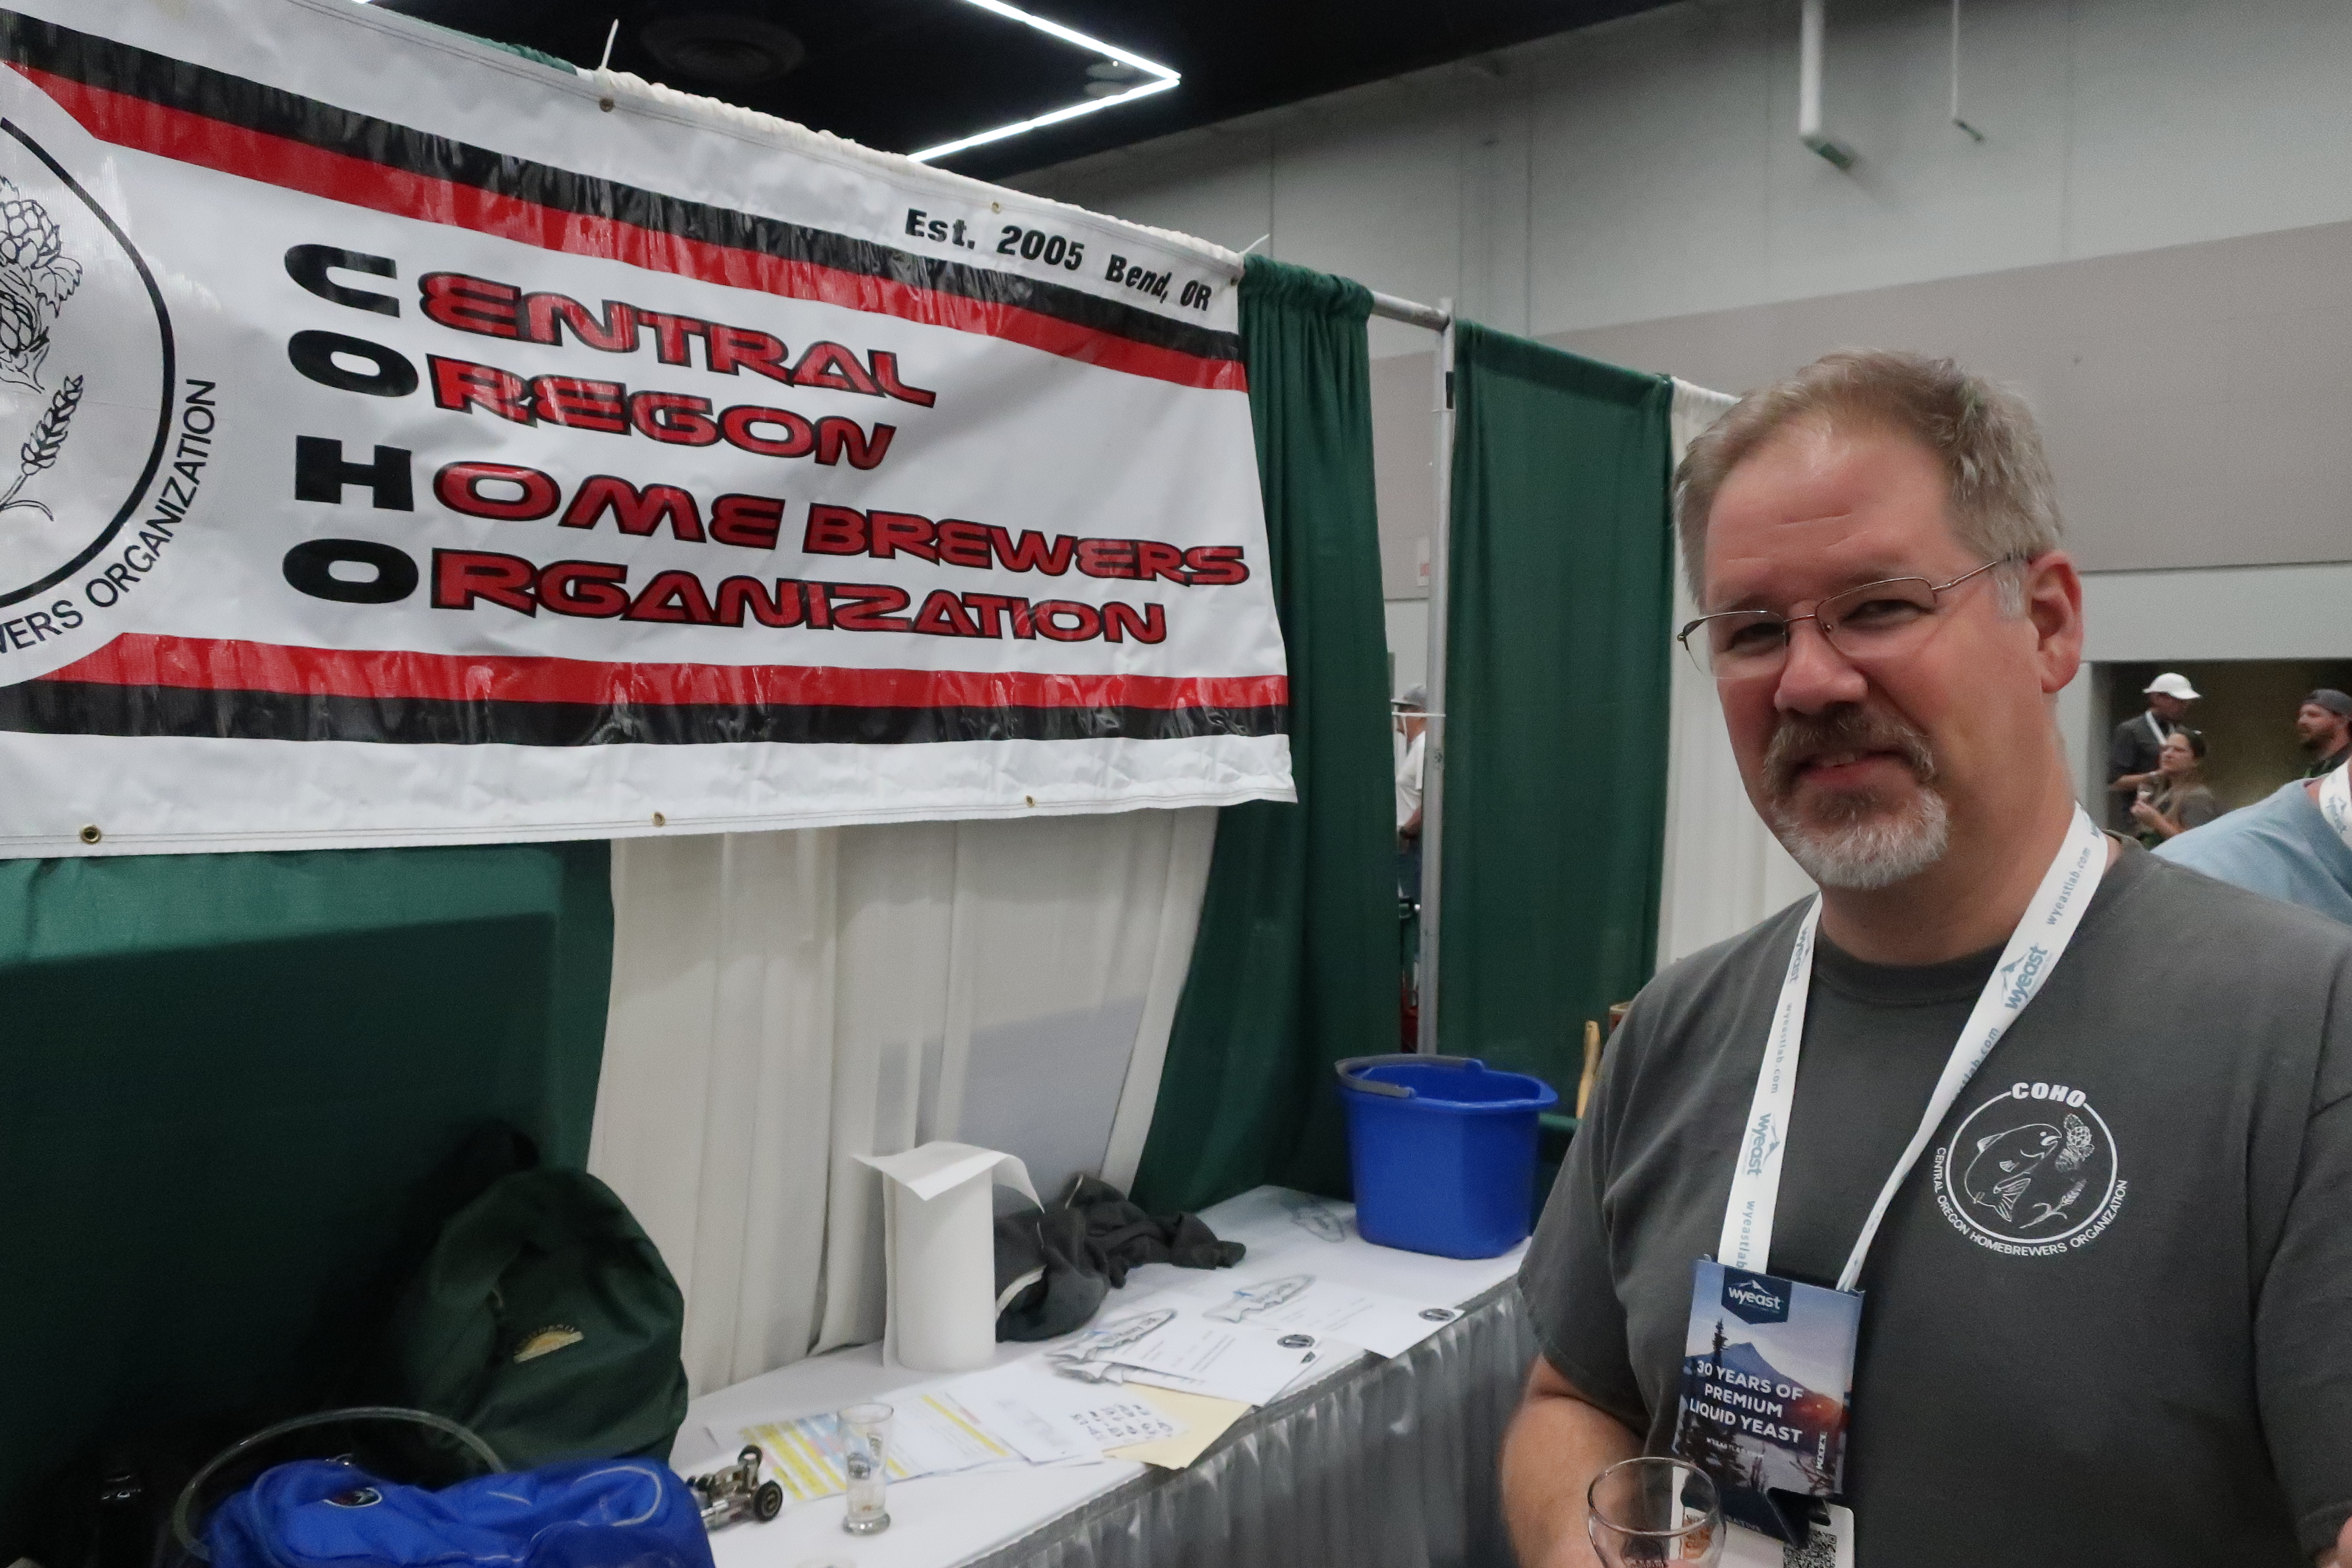 Jon Abernathy with the Central Oregon Homebrewers Organization during Club Night at Homebrew Con 2018.